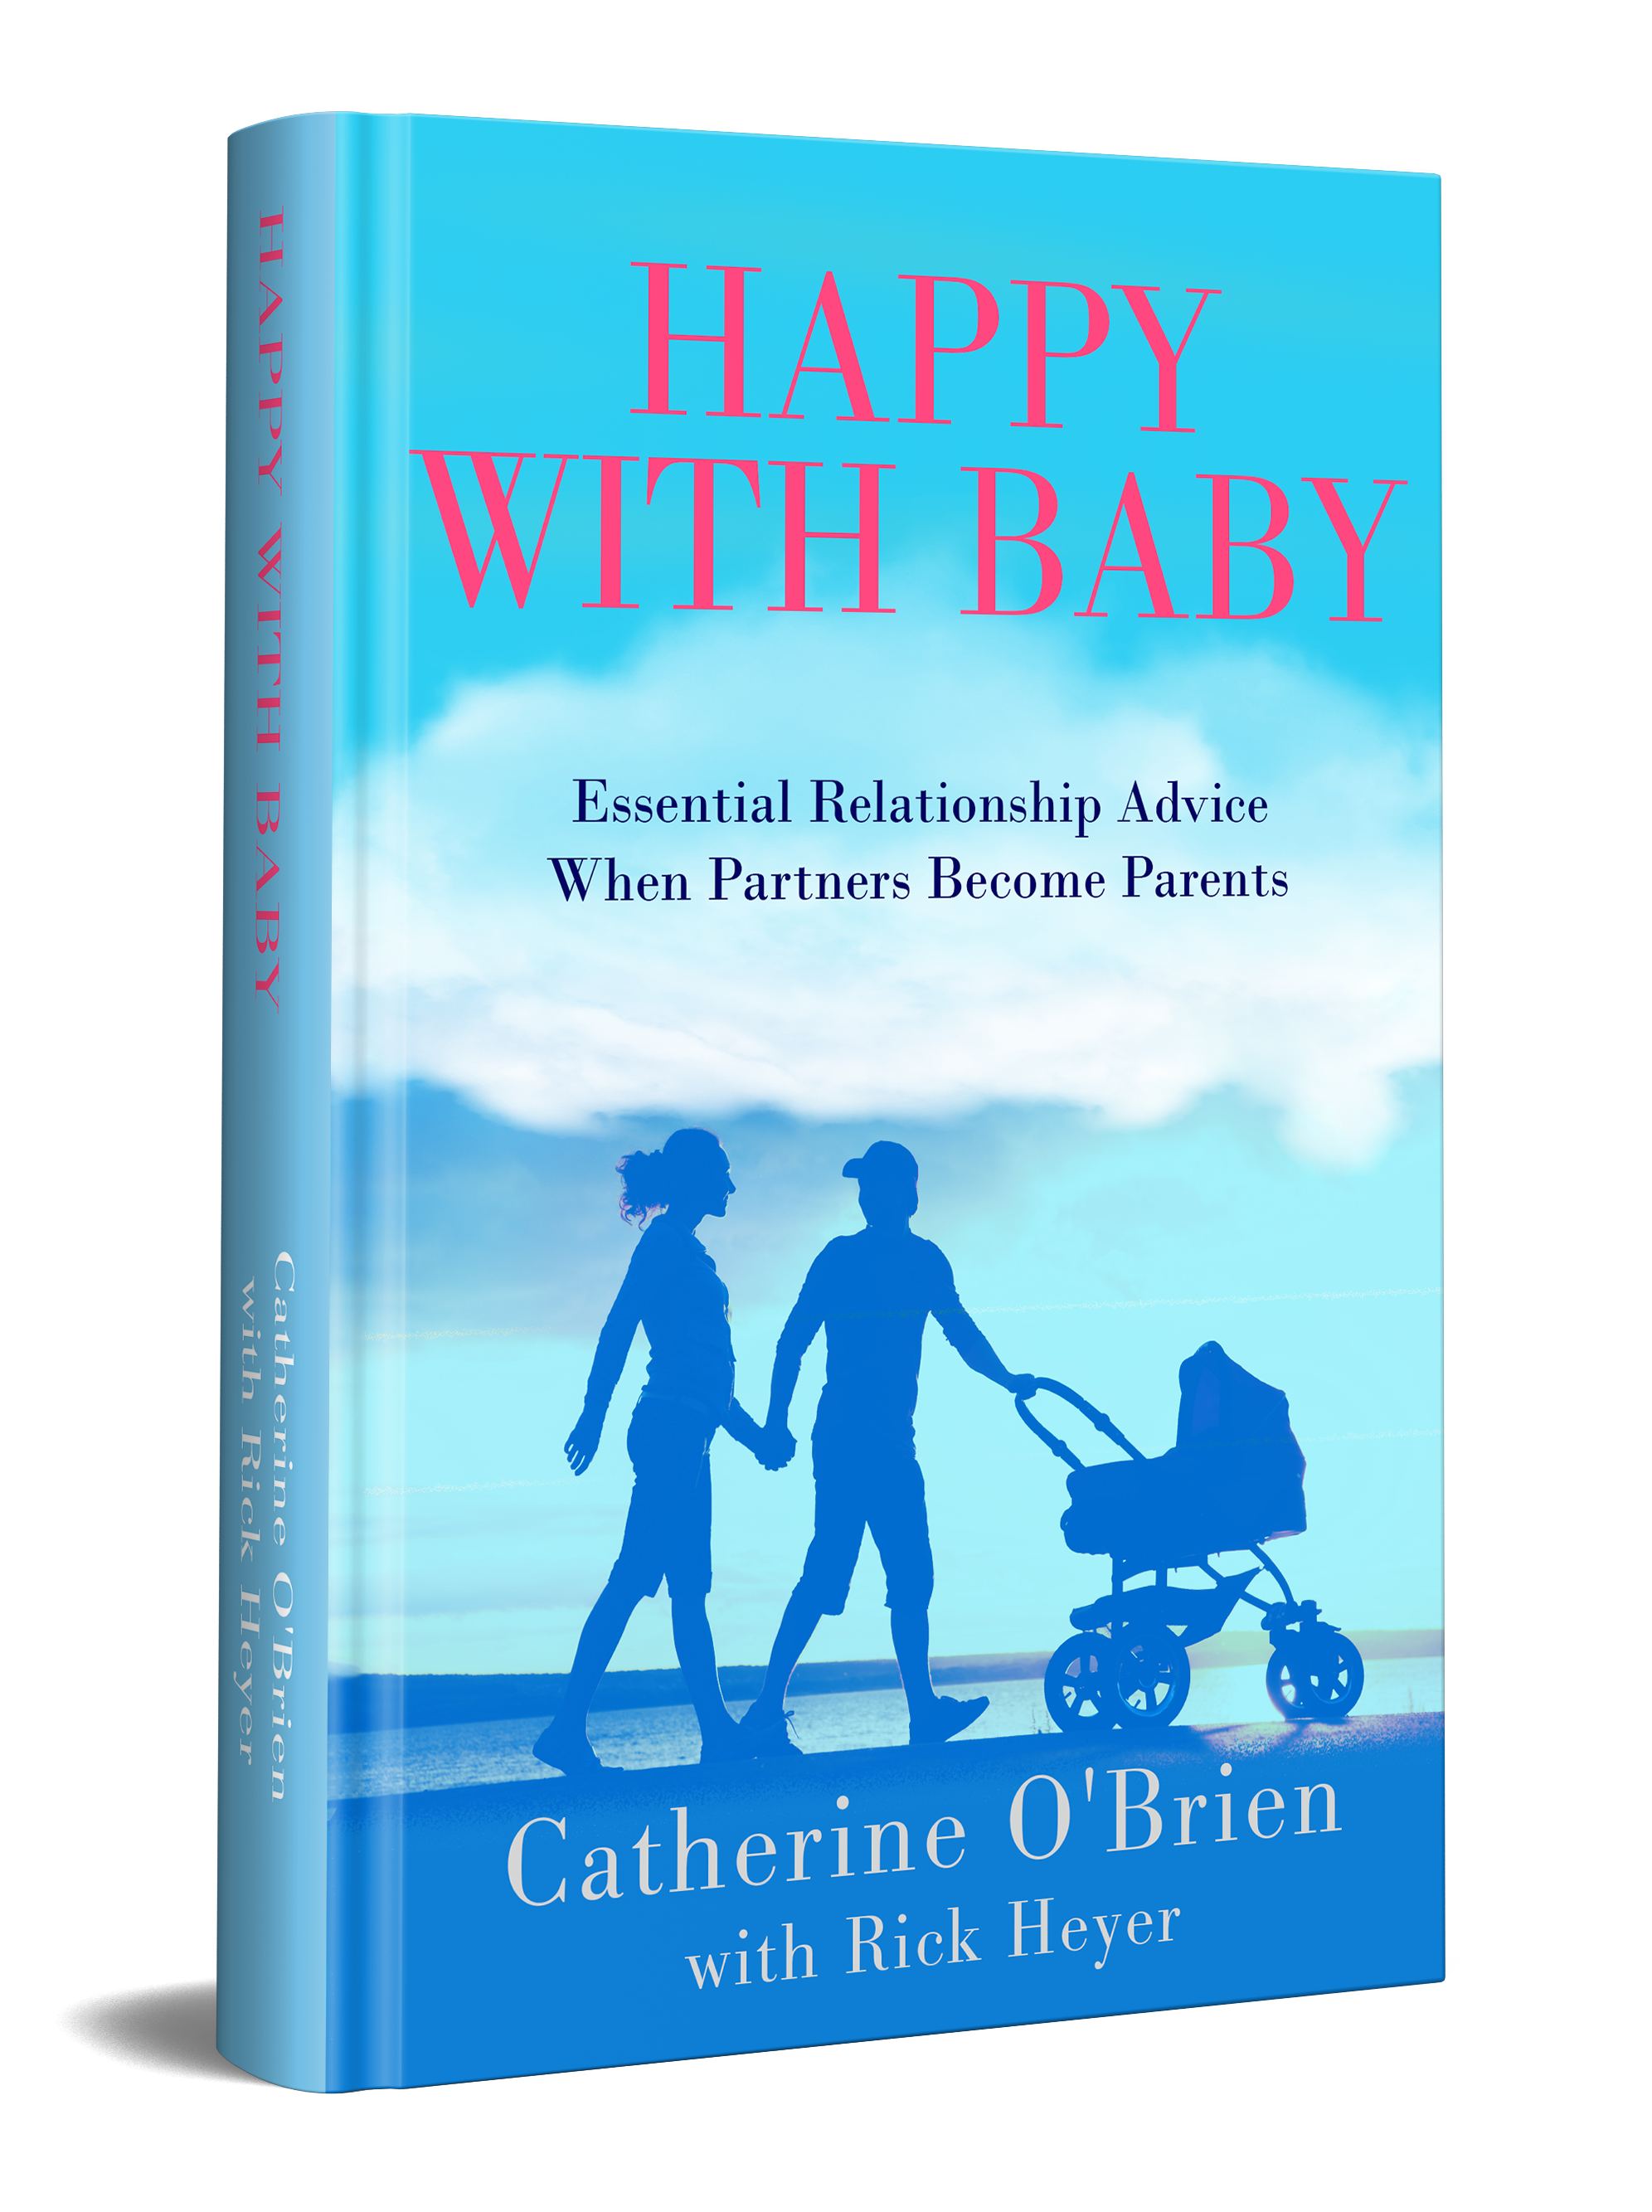 “Supportive, positive, practical, and honest. A clear and well-written book with immediately useful and concrete steps new parents can take to care for themselves and their relationship. Using relatable case studies from Catherine's 20 plus years as a Licensed Marriage and Family Therapist as well as their own relationship and parenting struggles, Catherine and Rick cover all new parenthood challenges with empathy, insight and humor. Highly recommended for all new parents as well as grandparents or other loved ones who want to offer support to the new family.” - Amazon Customer ⭐⭐⭐⭐⭐ - 